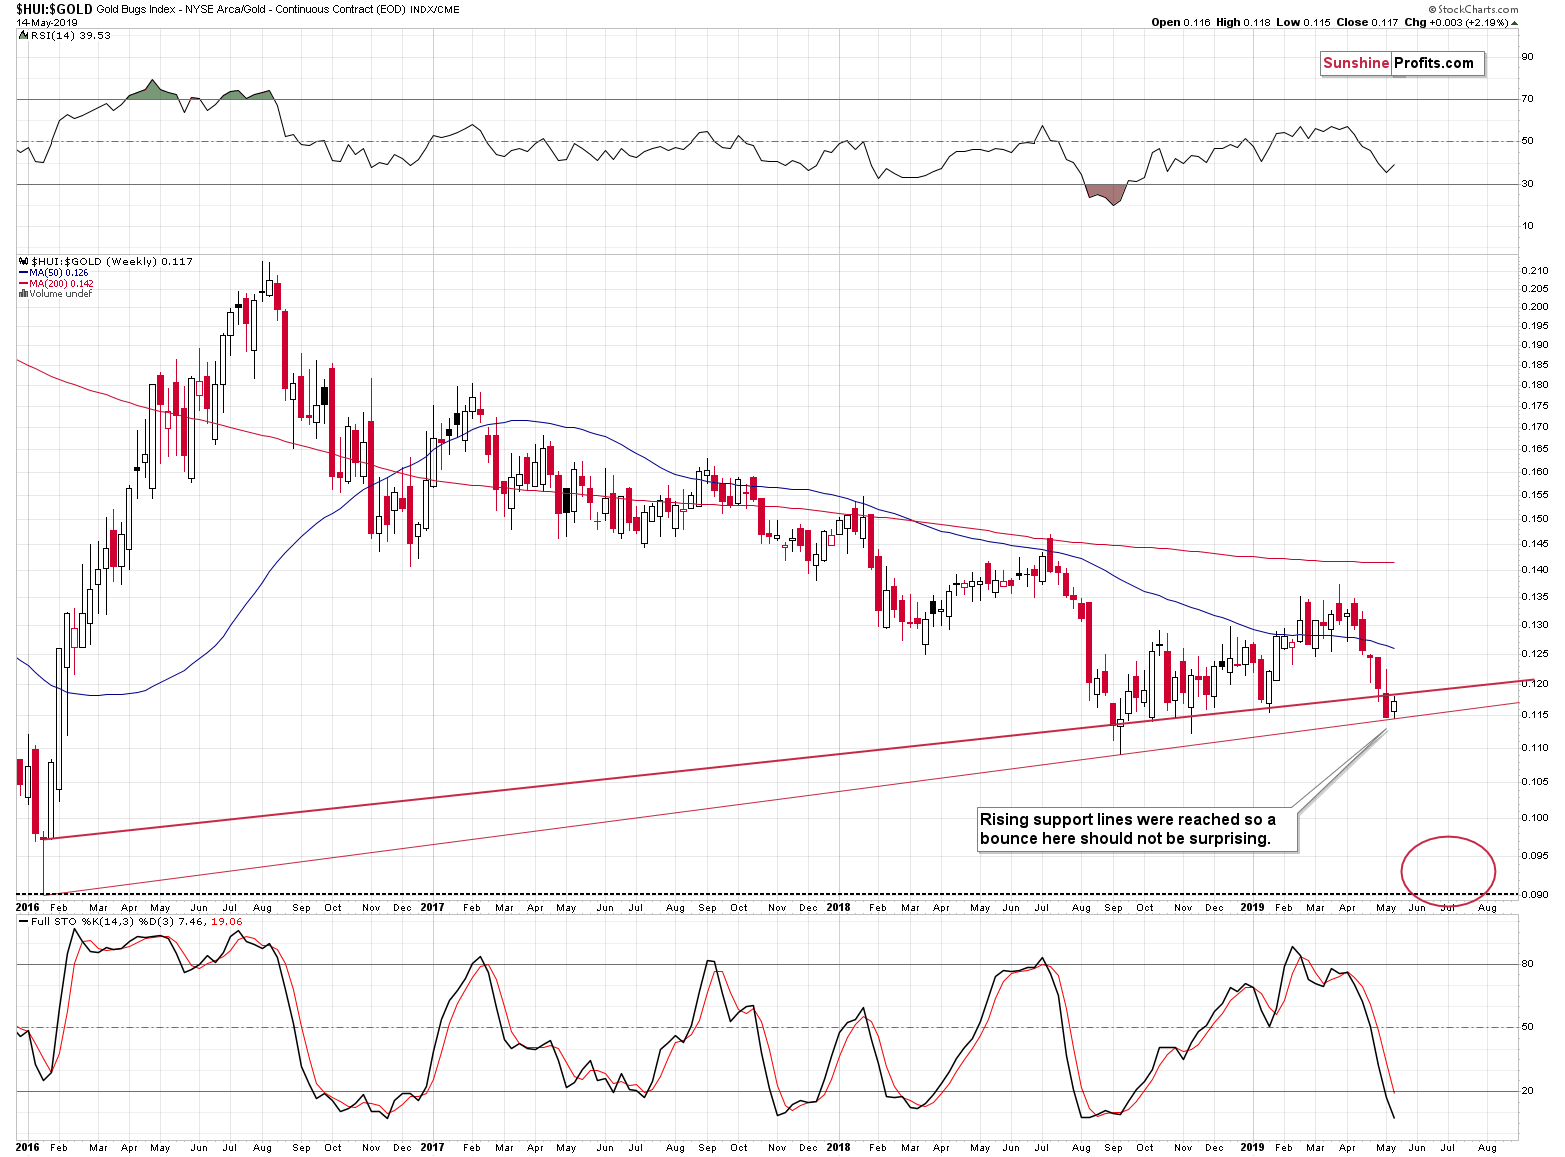 Miners-To-Gold Ratio